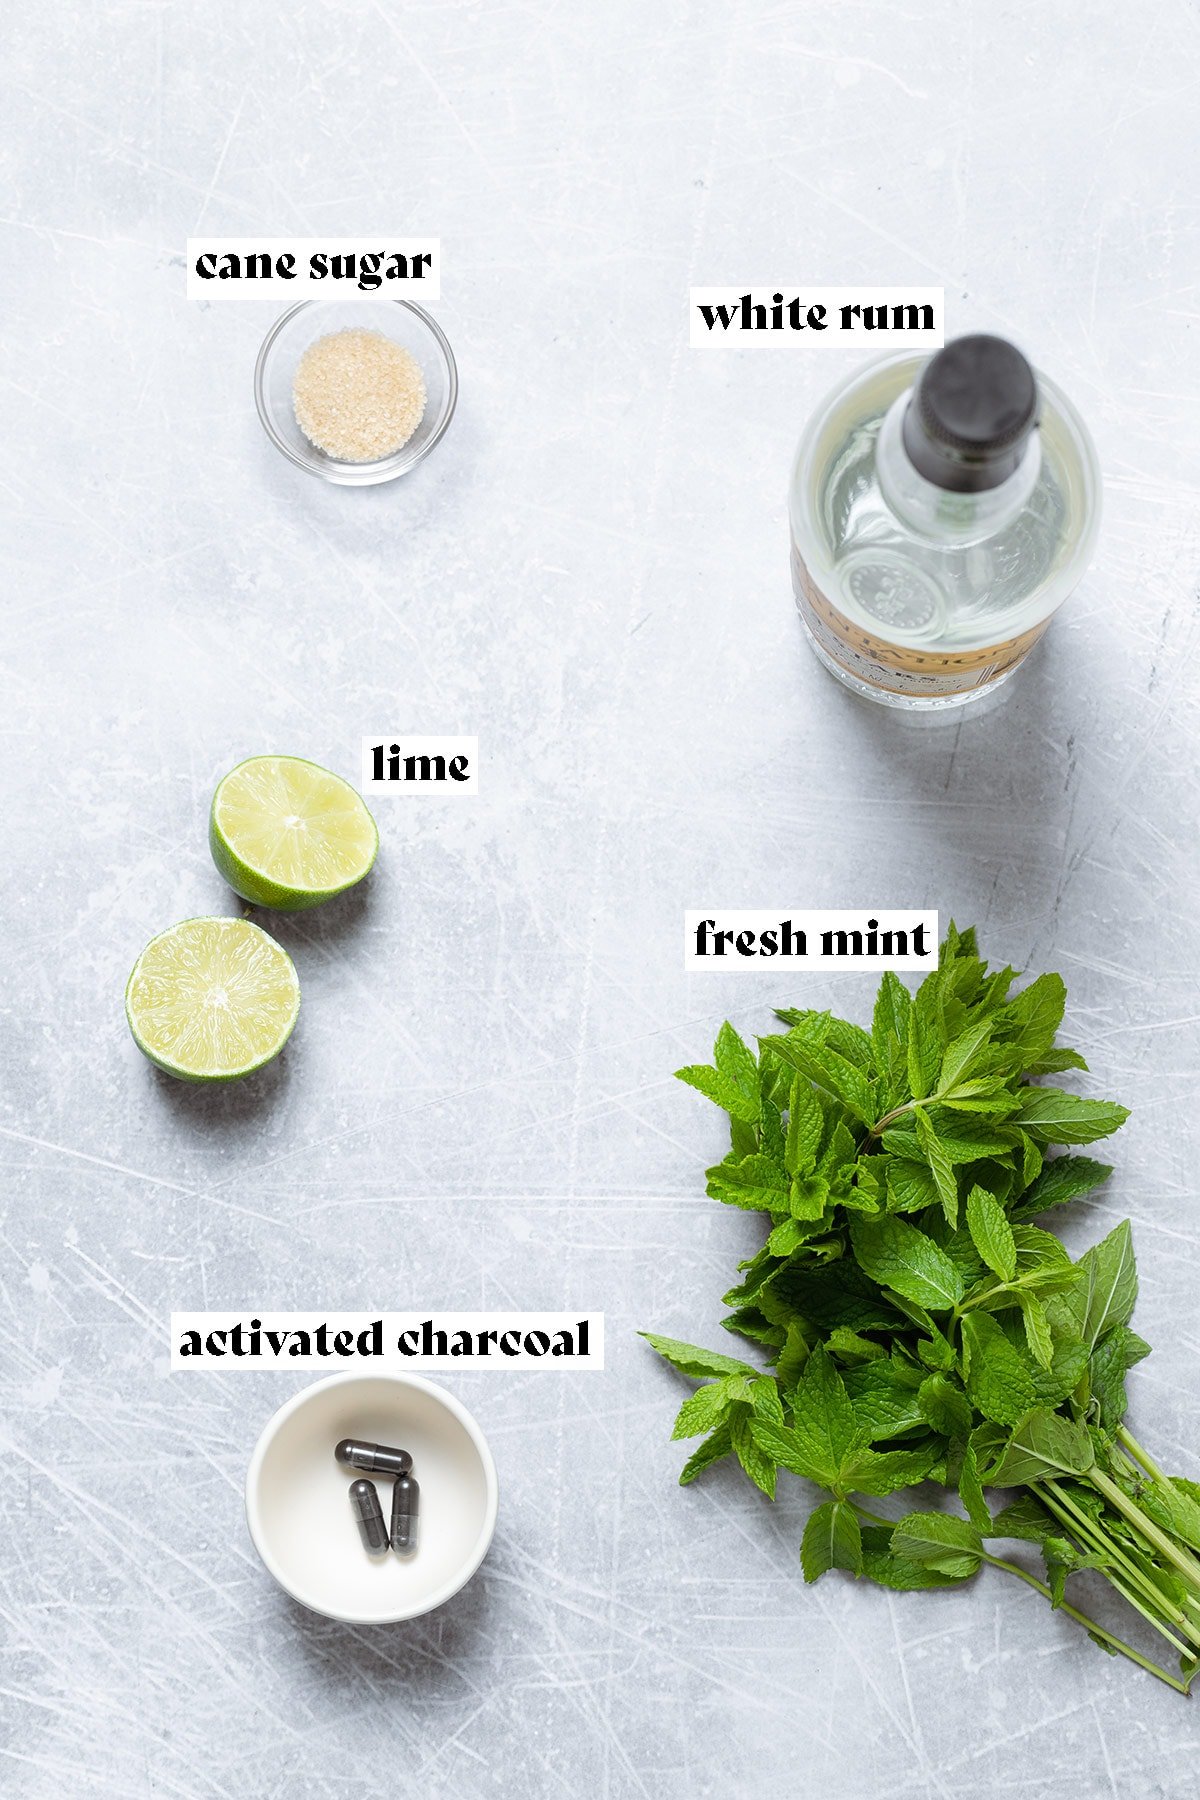 Ingredients for black mojito like rum, mint, and charcoal capsuled on a grey background.